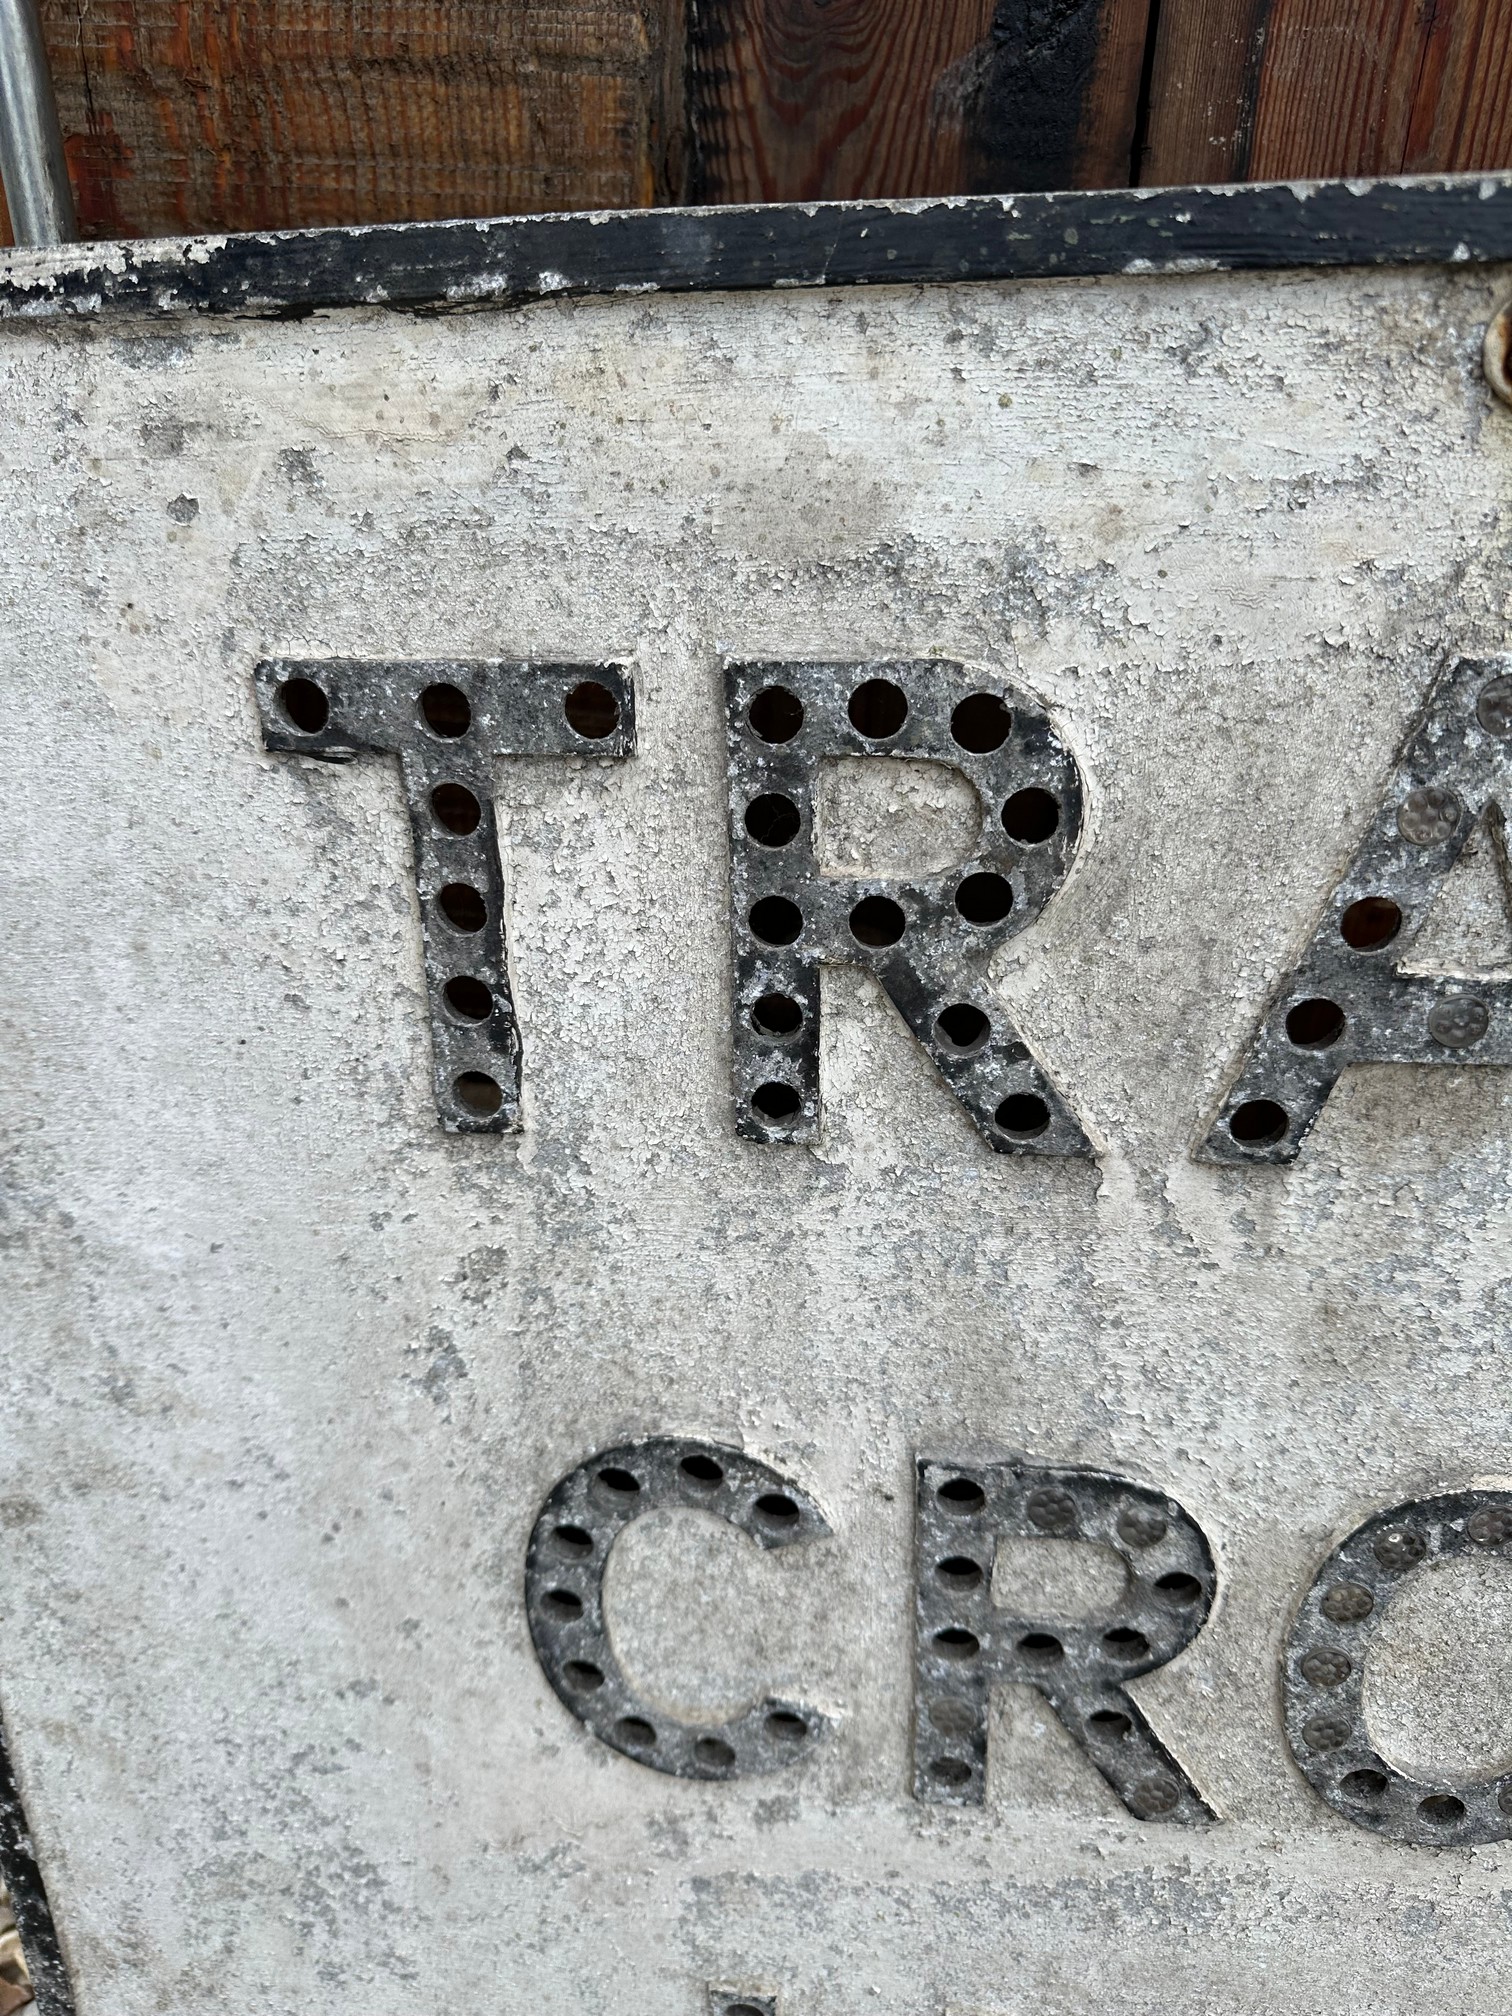 Trains Cross Here - a cast aluminium road sign with pole mounts, some glass reflector beads present, - Image 3 of 7